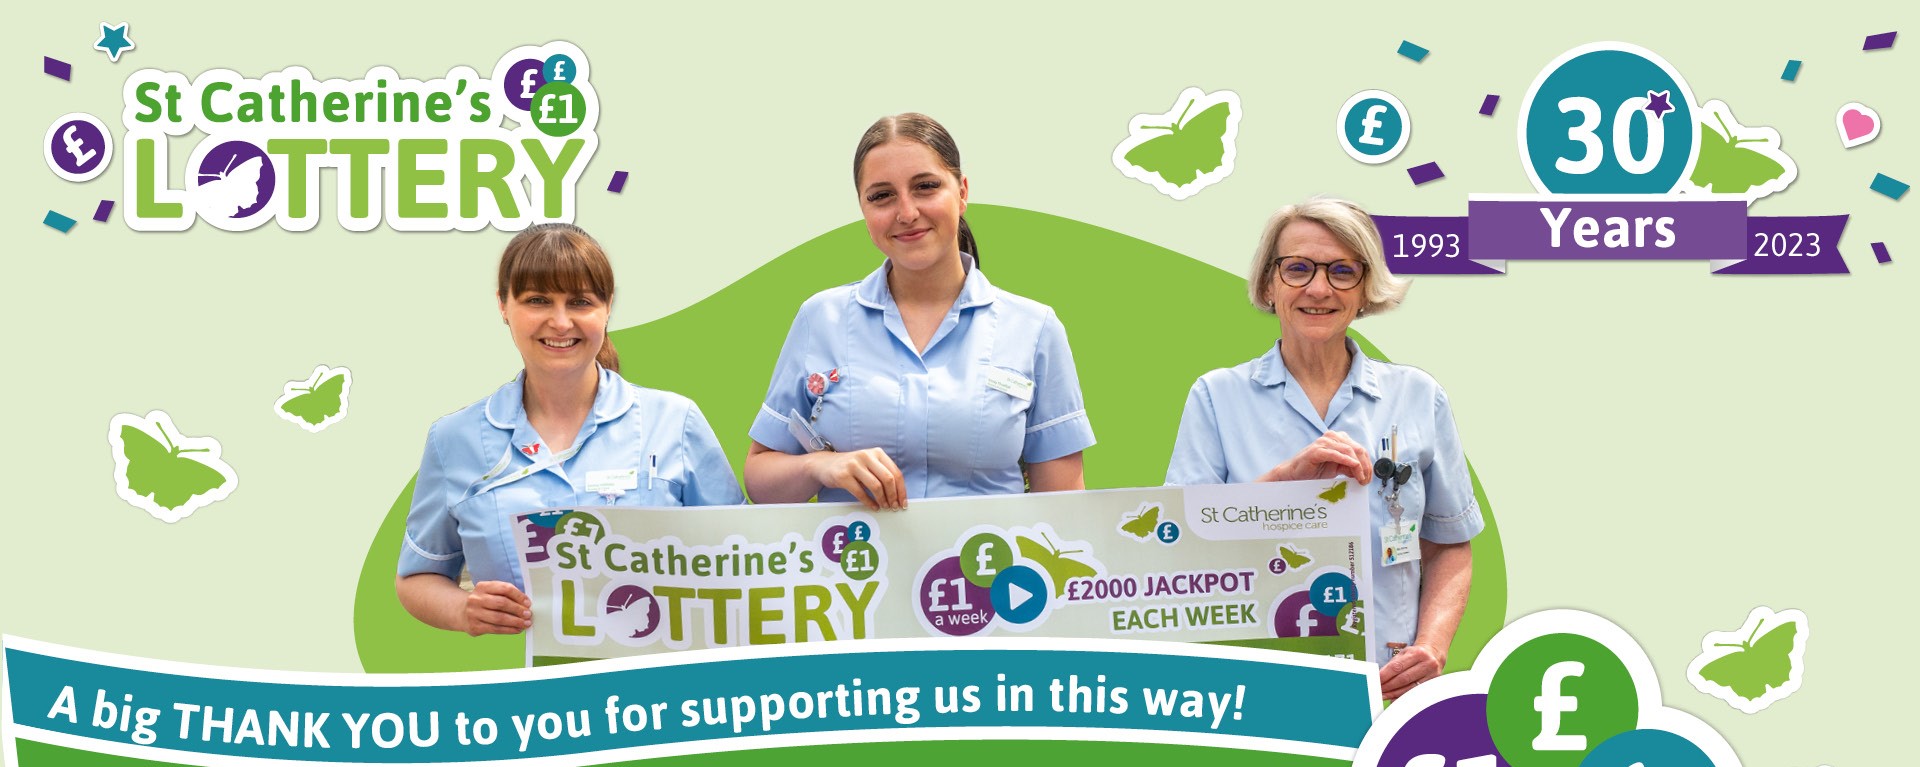 Our hospice, funded by your children's charity Lottery membership